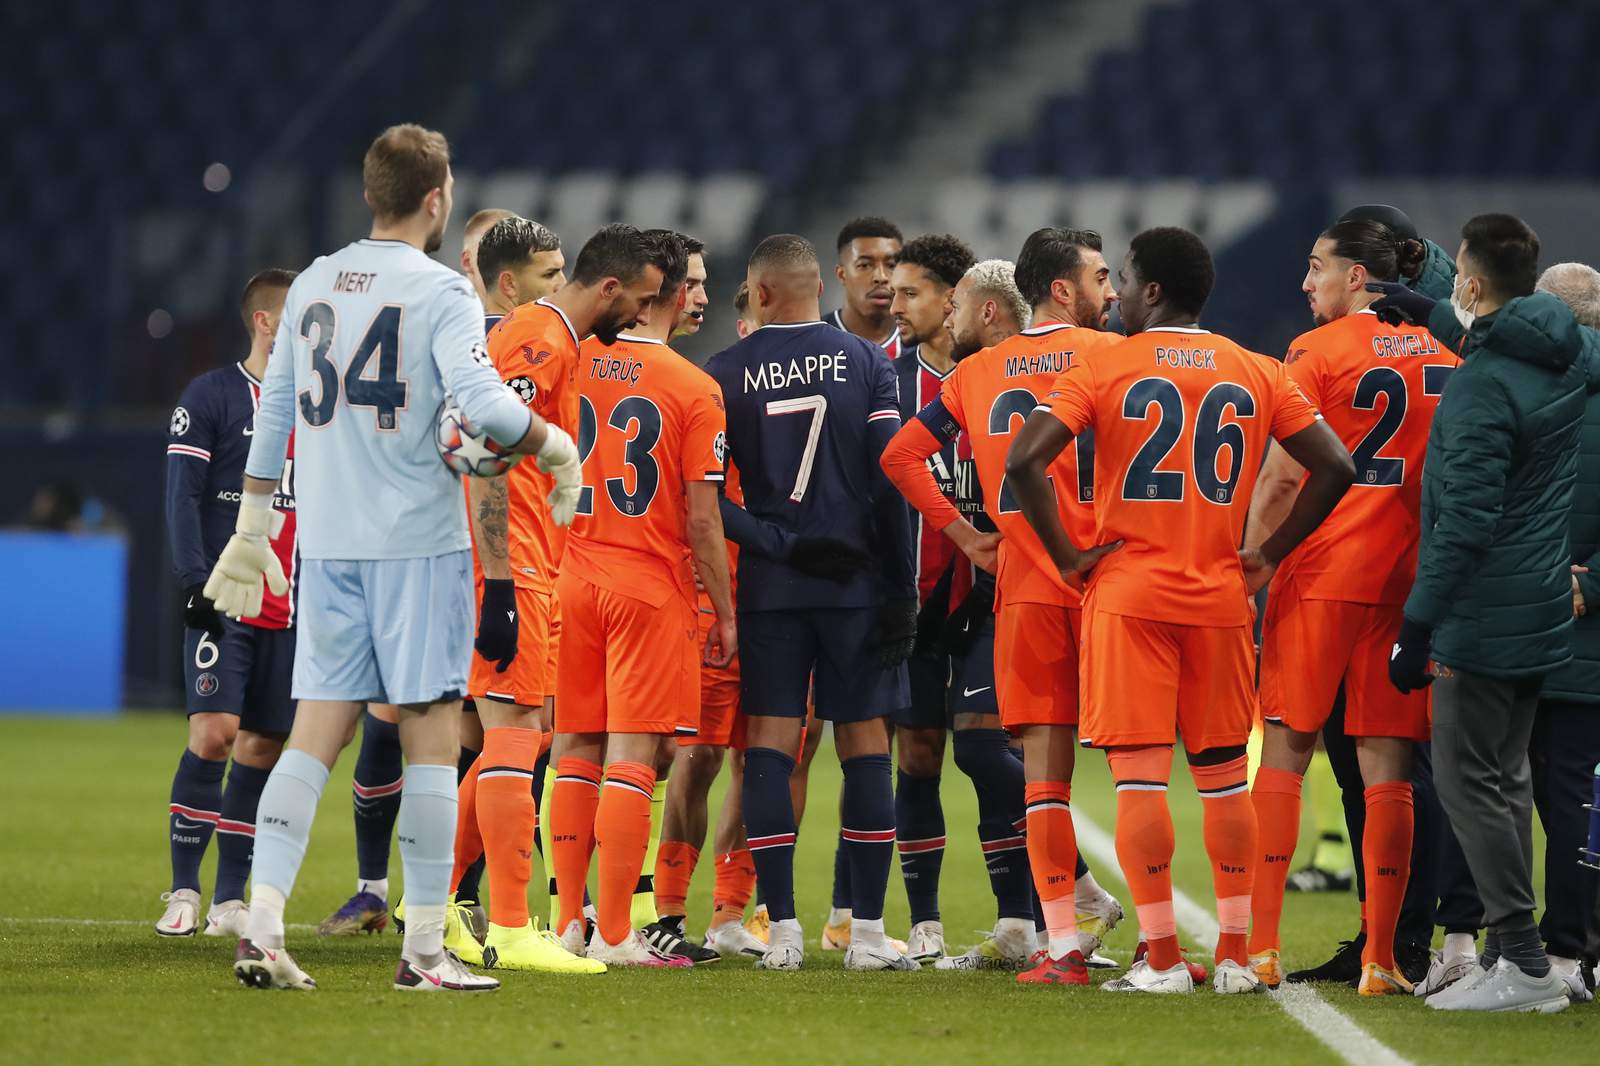 Players walk off in protest against alleged racism in CL